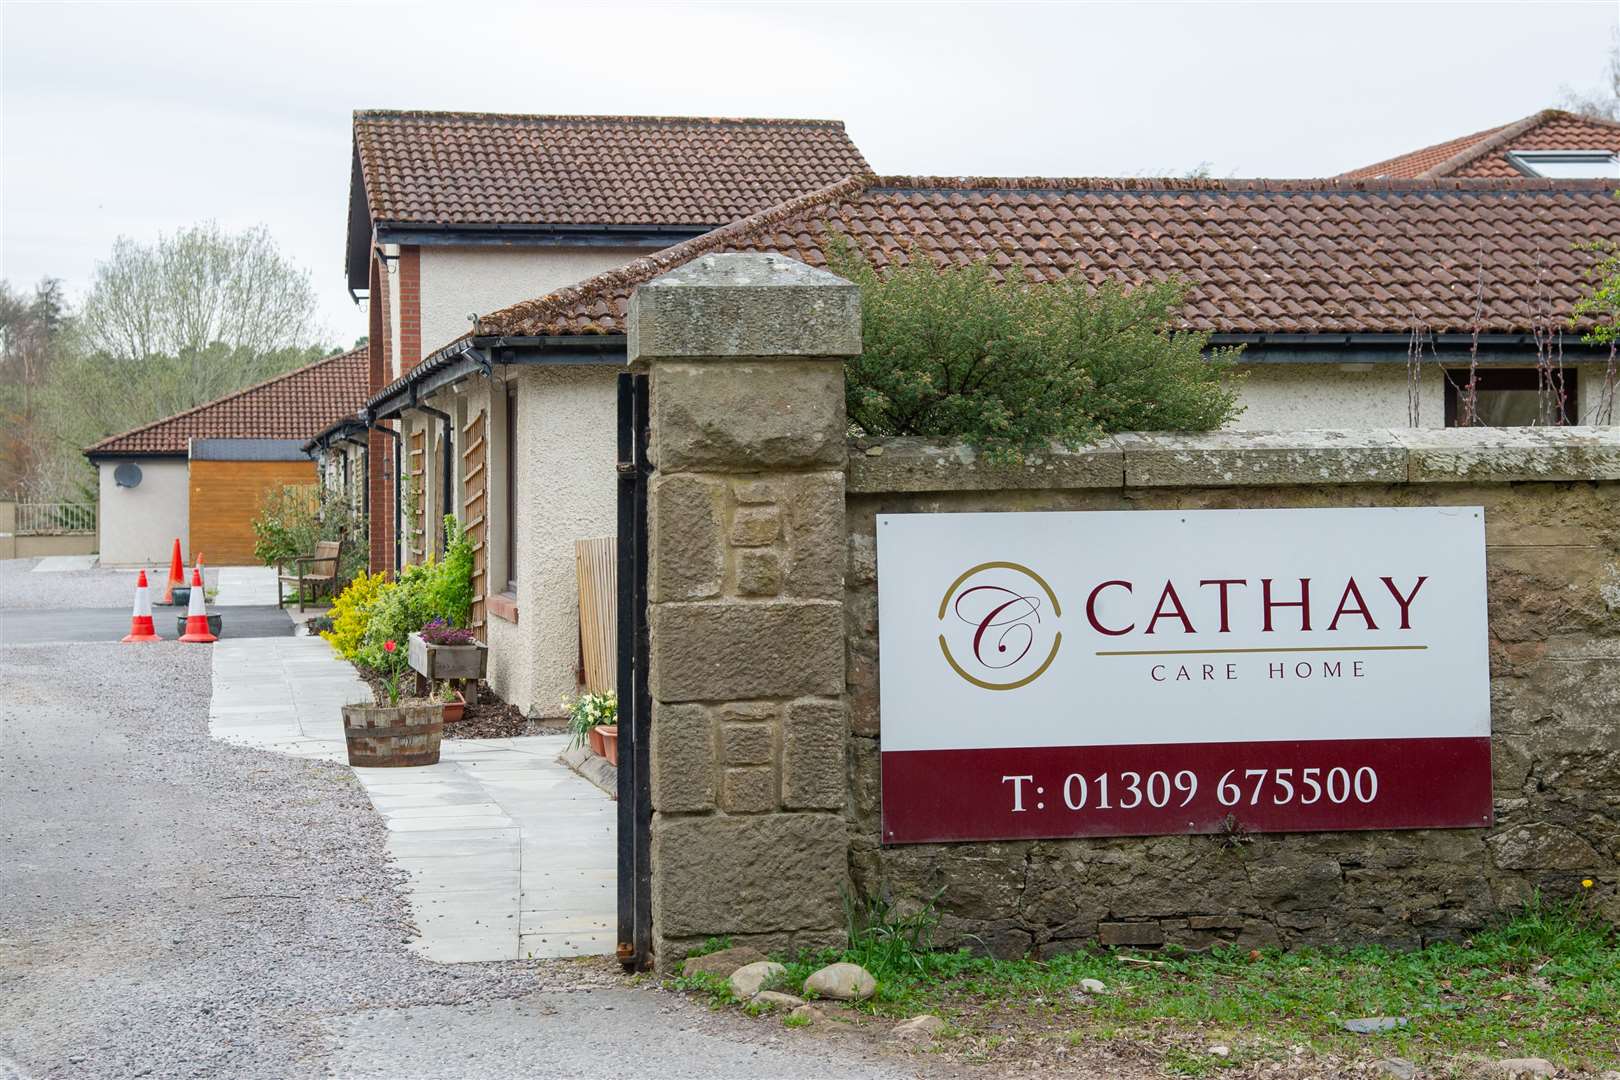 Cathay Care Home. Picture: Daniel Forsyth